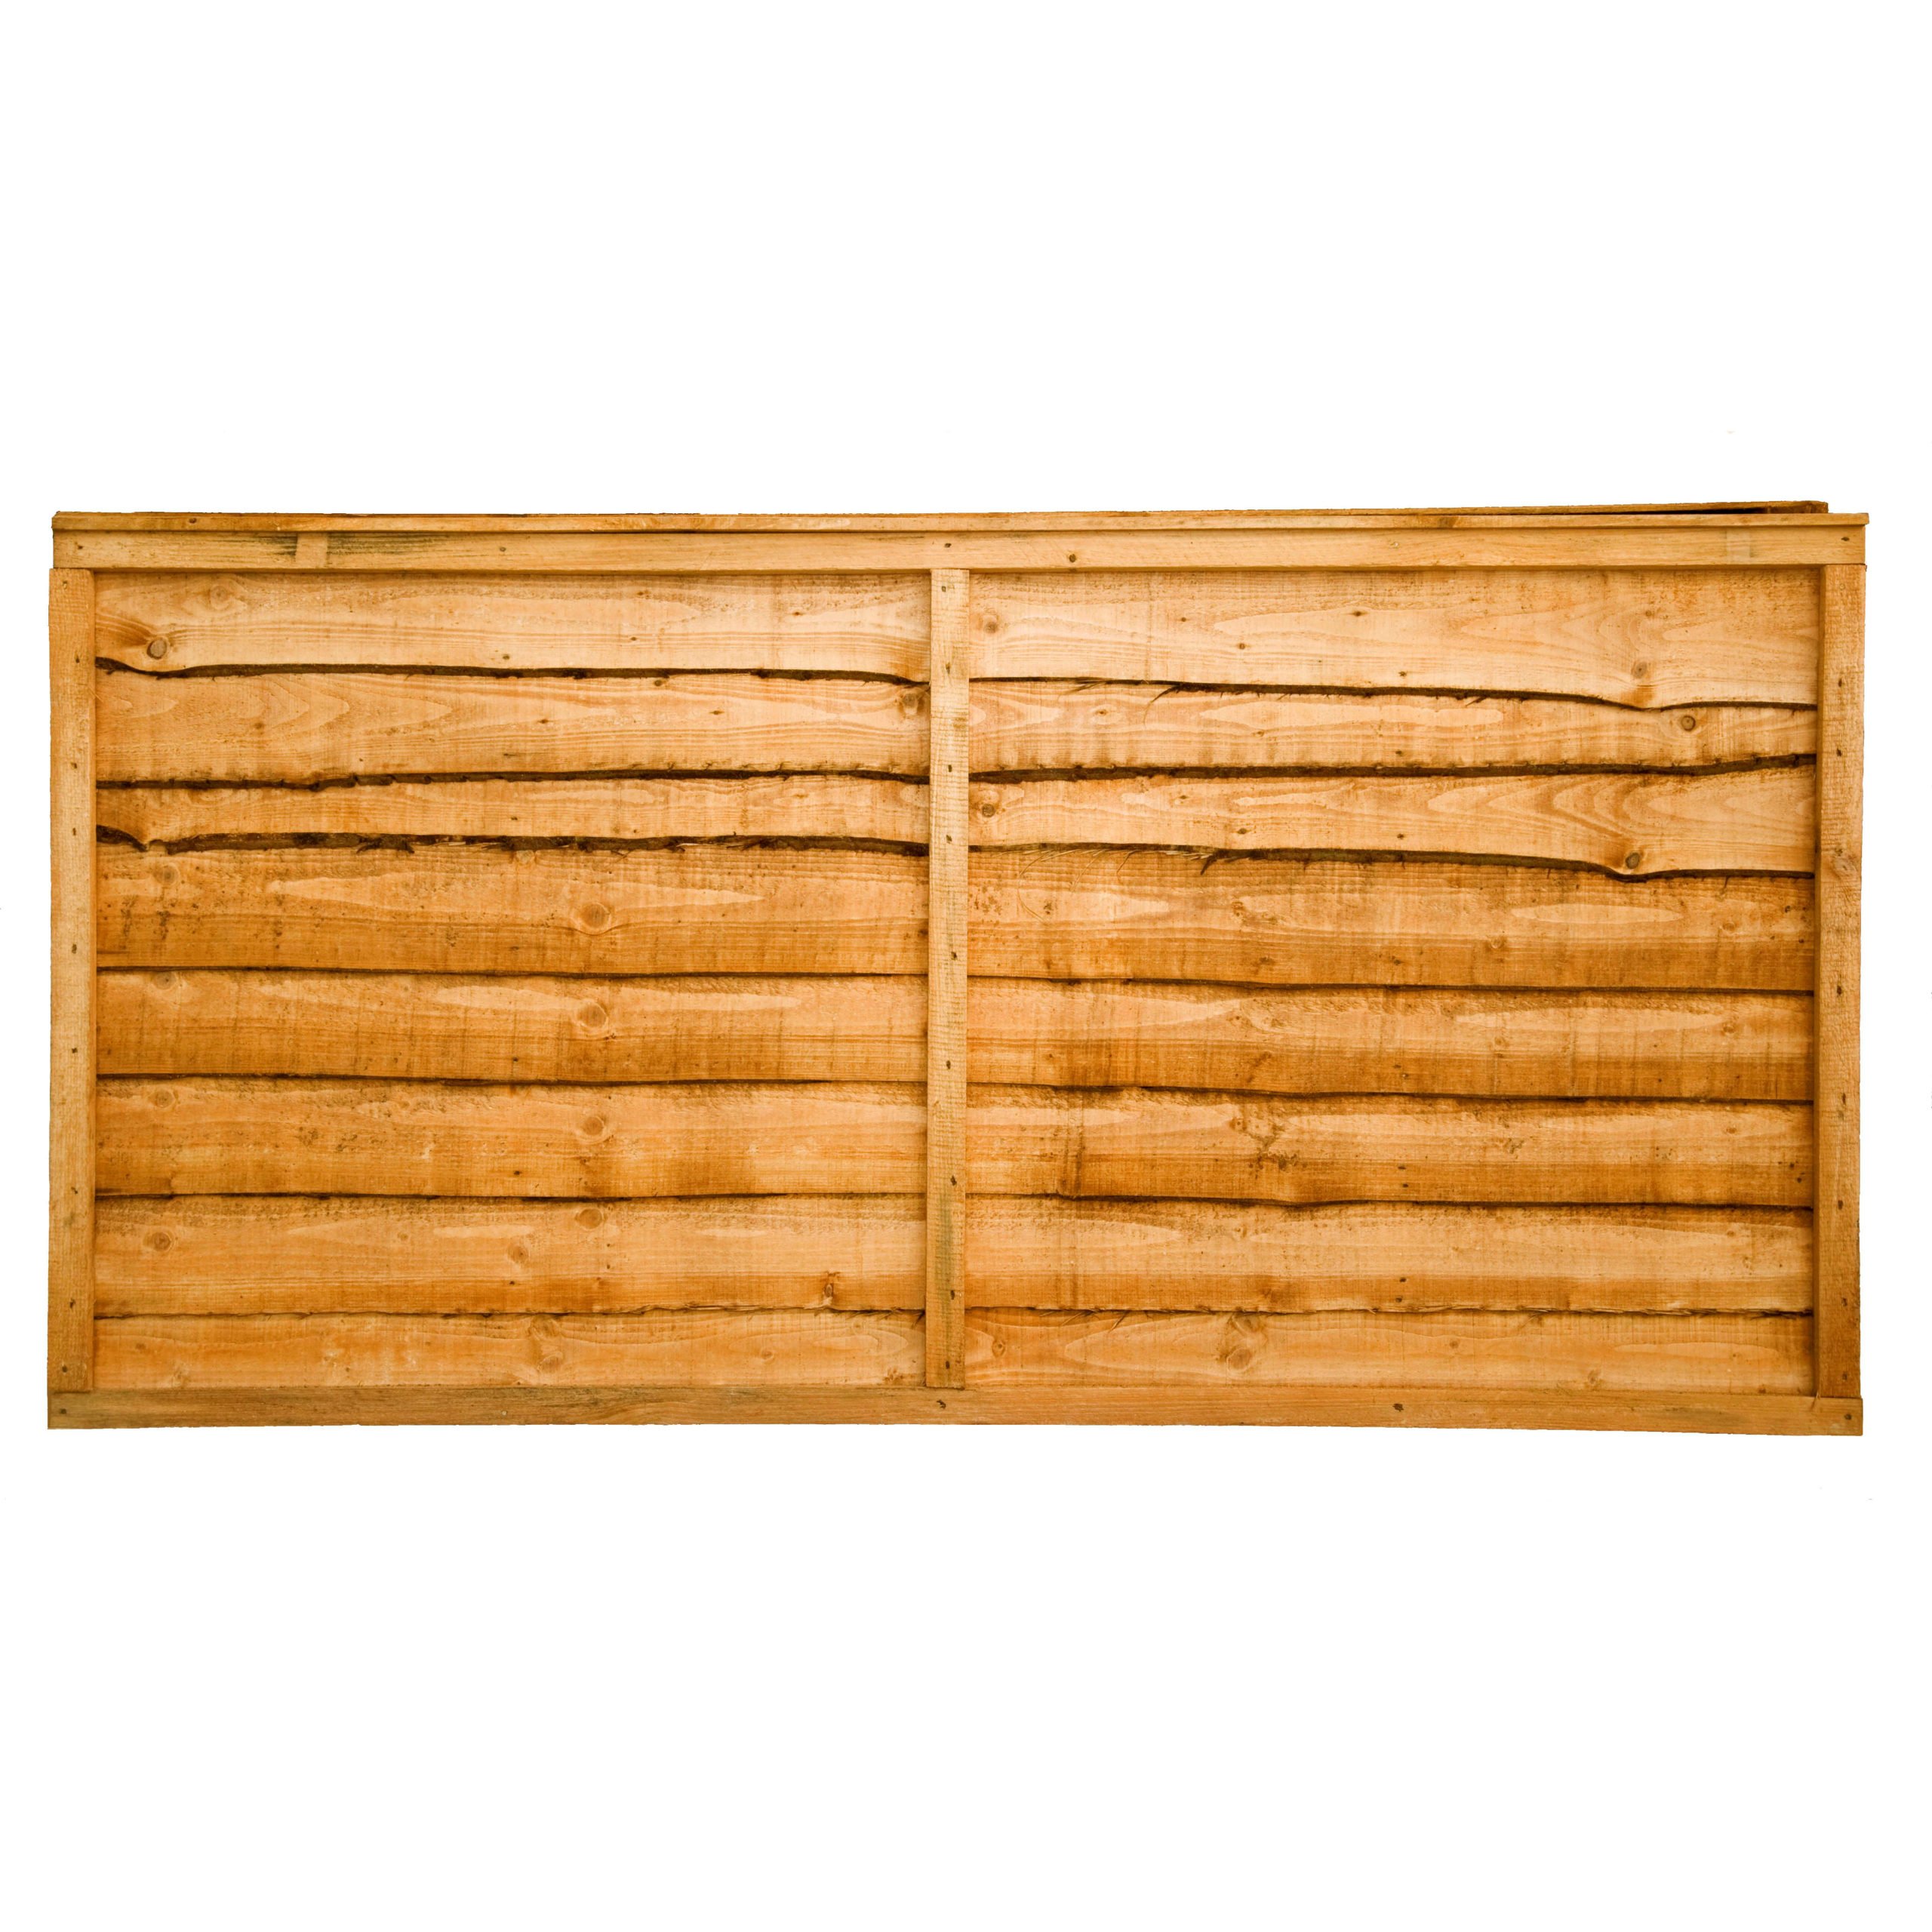 Brand New Premier 6ft X 2ft Larch Lap Fence Panel Garden Wooden Fencing RRP £25 